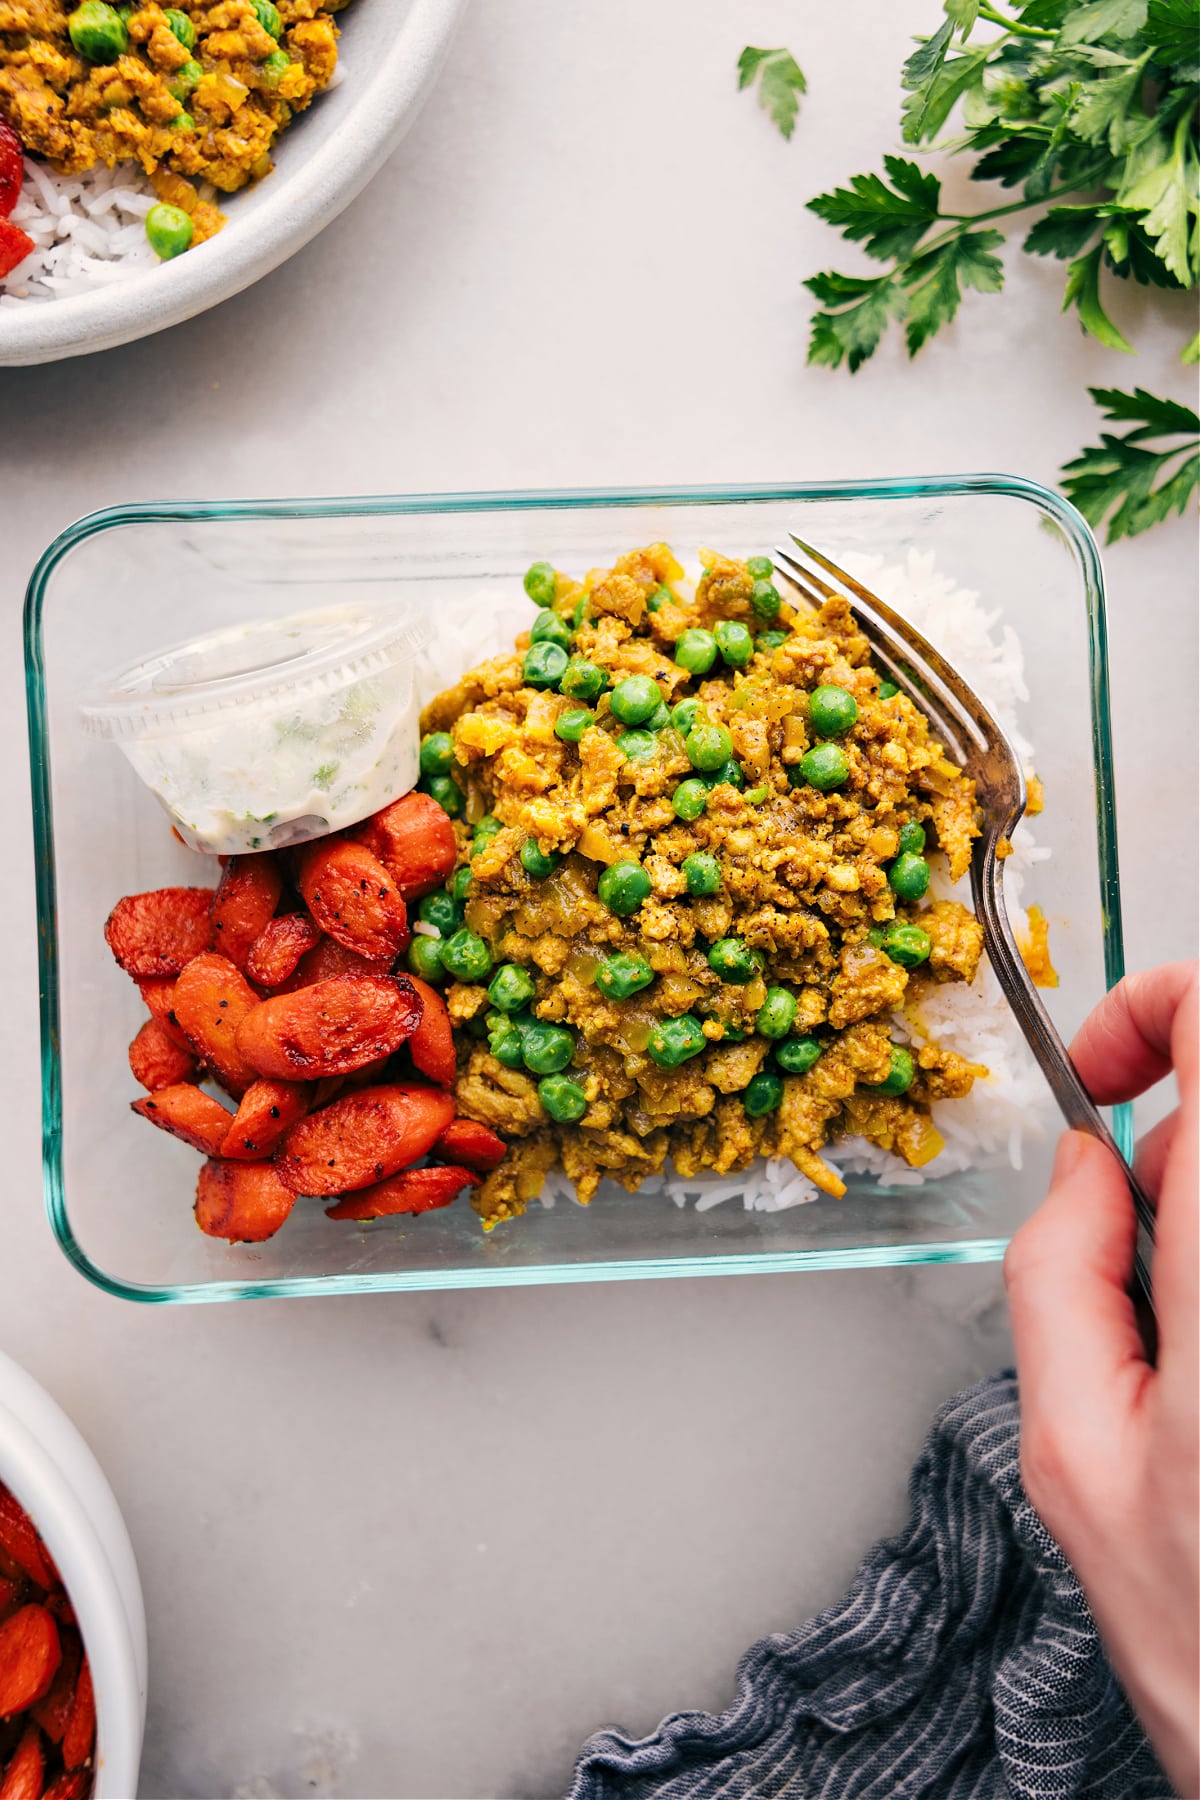 A meal-prepped glass container filled with rice, savory Indian ground turkey, roasted vegetables, and sauce--ready for a quick and delicious meal.